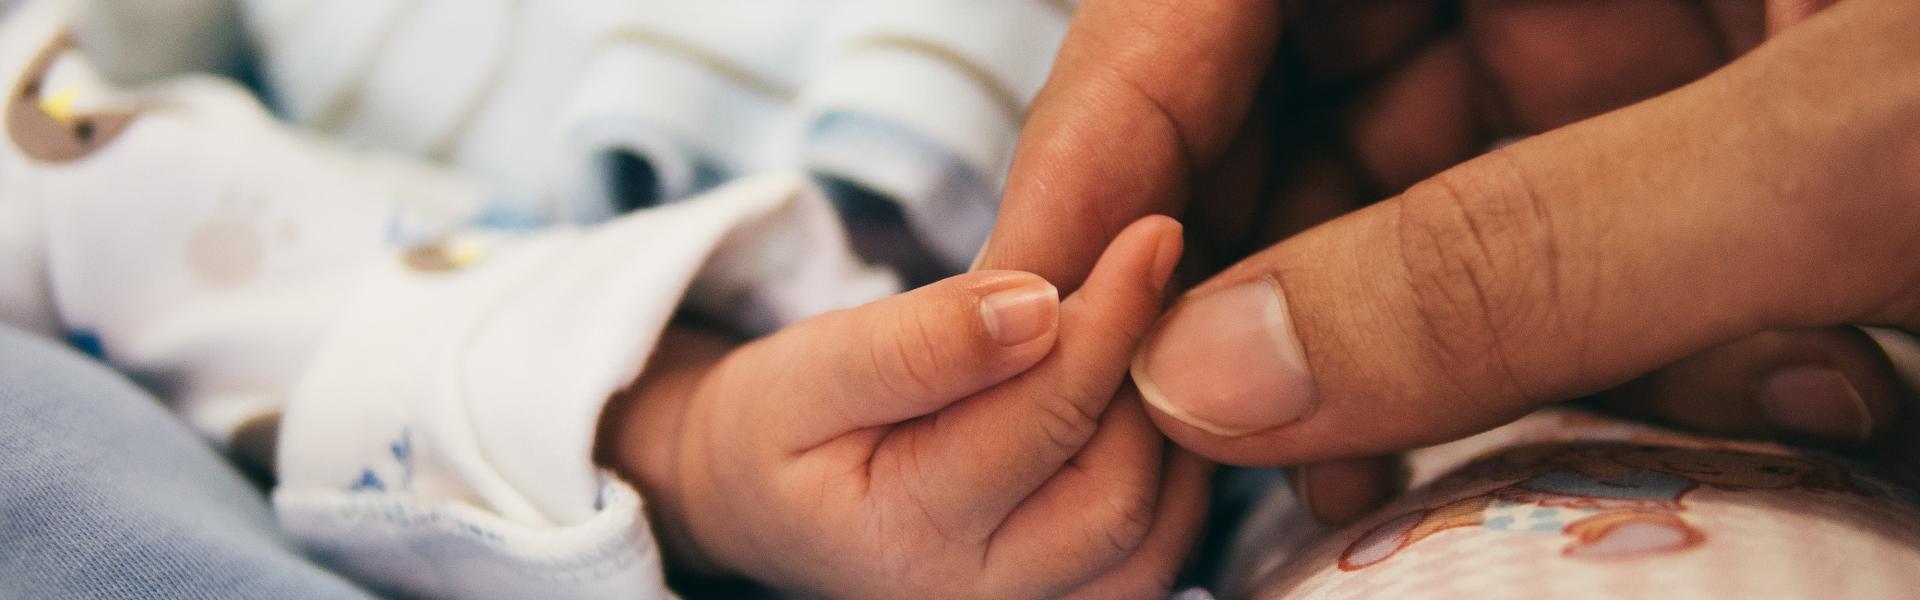 A nurse holding the hand of a newborn baby.